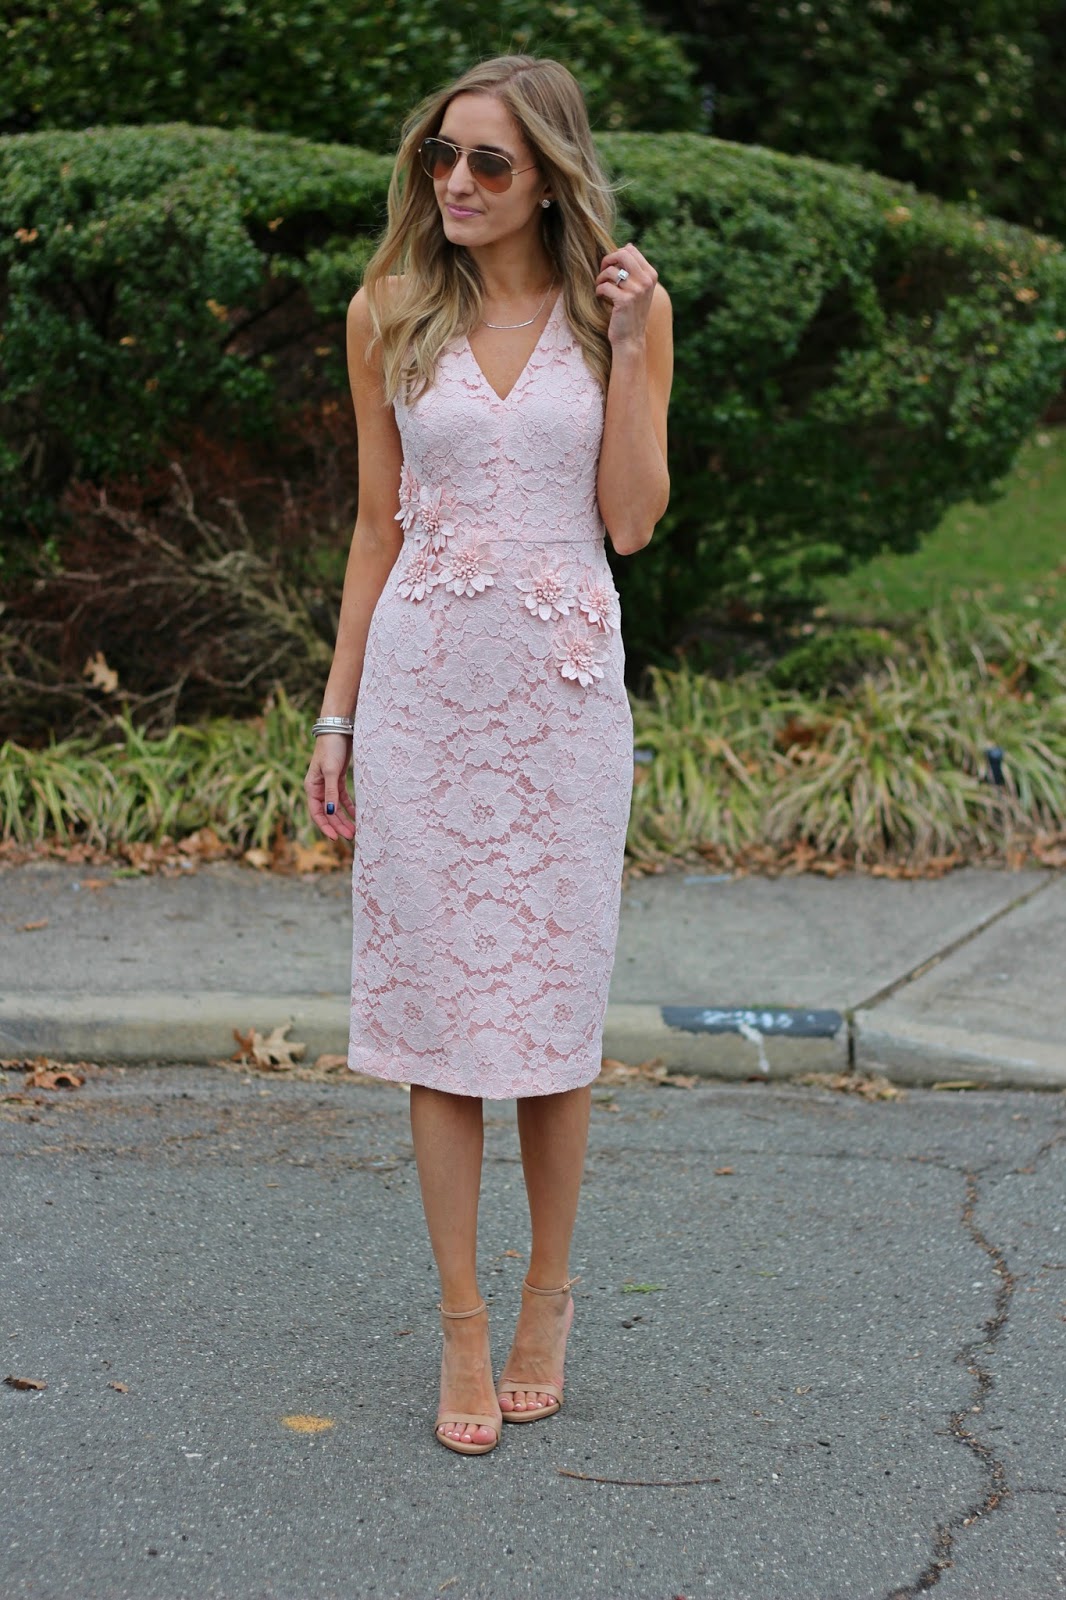 Michelles Paige Fashion Blogger Based In New York Bridal Shower Outfit Ideas For Guests